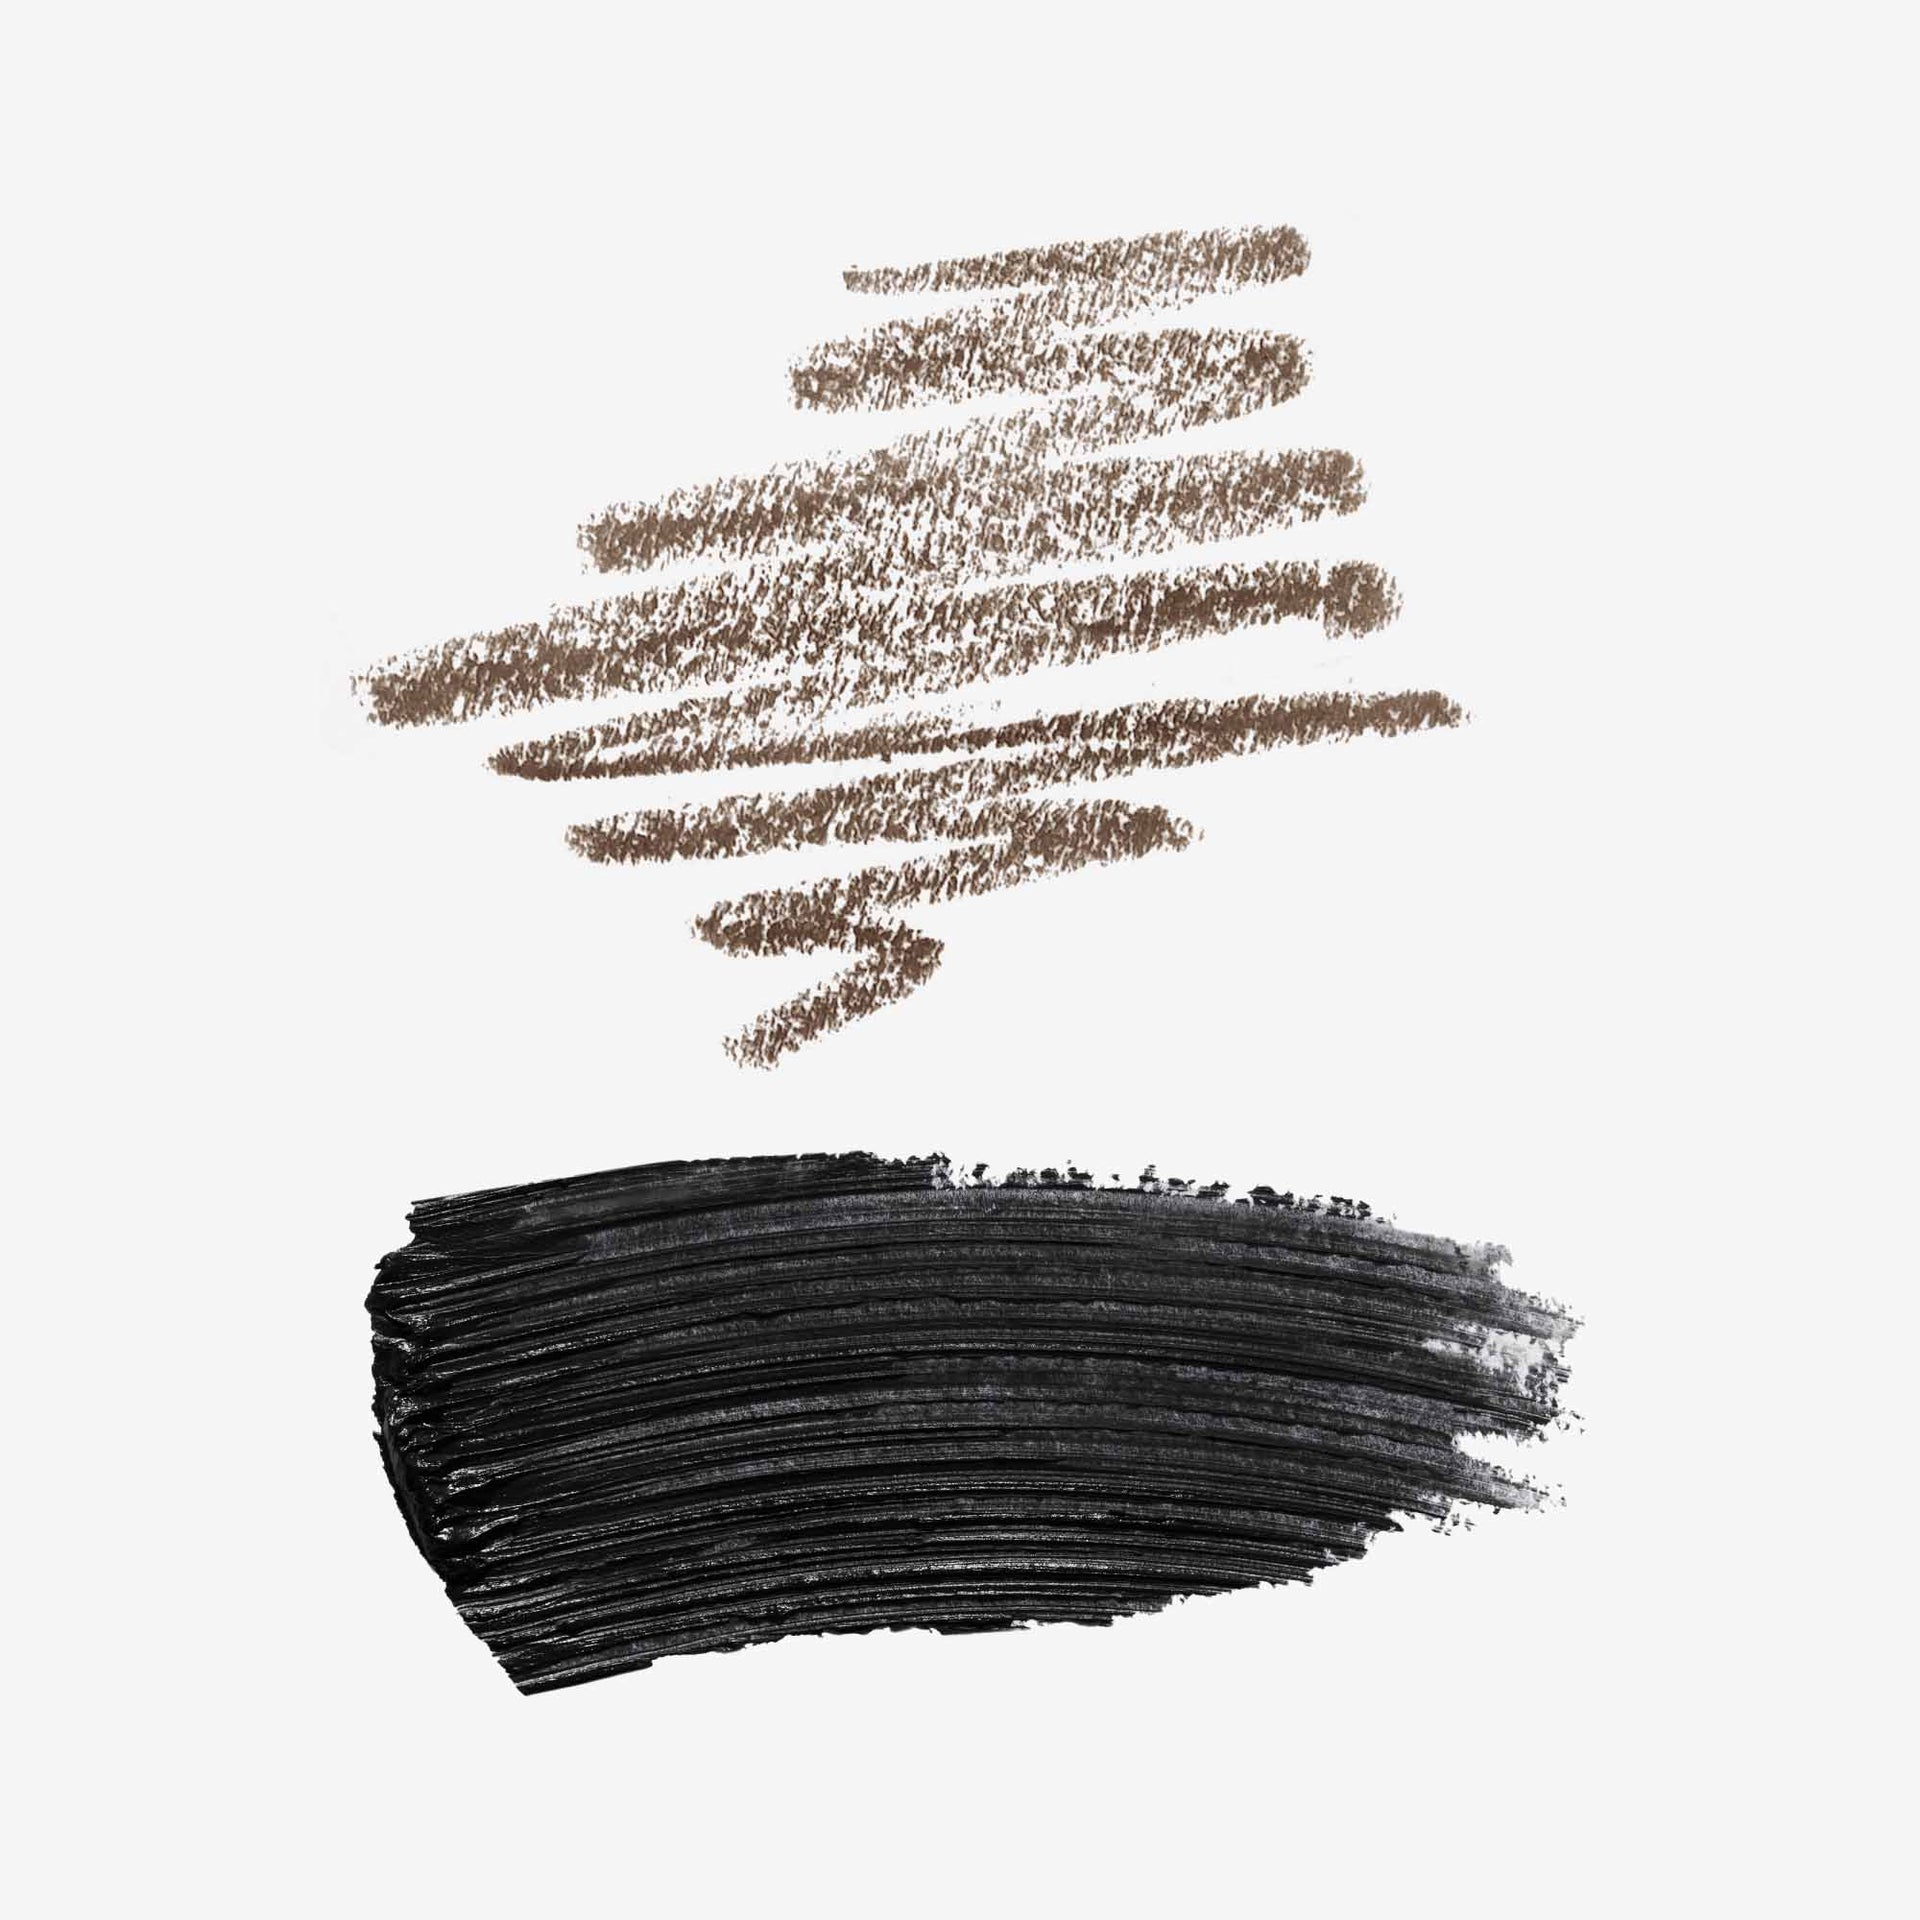 Taupe | Brow & Lash Styling Kit -Taupe